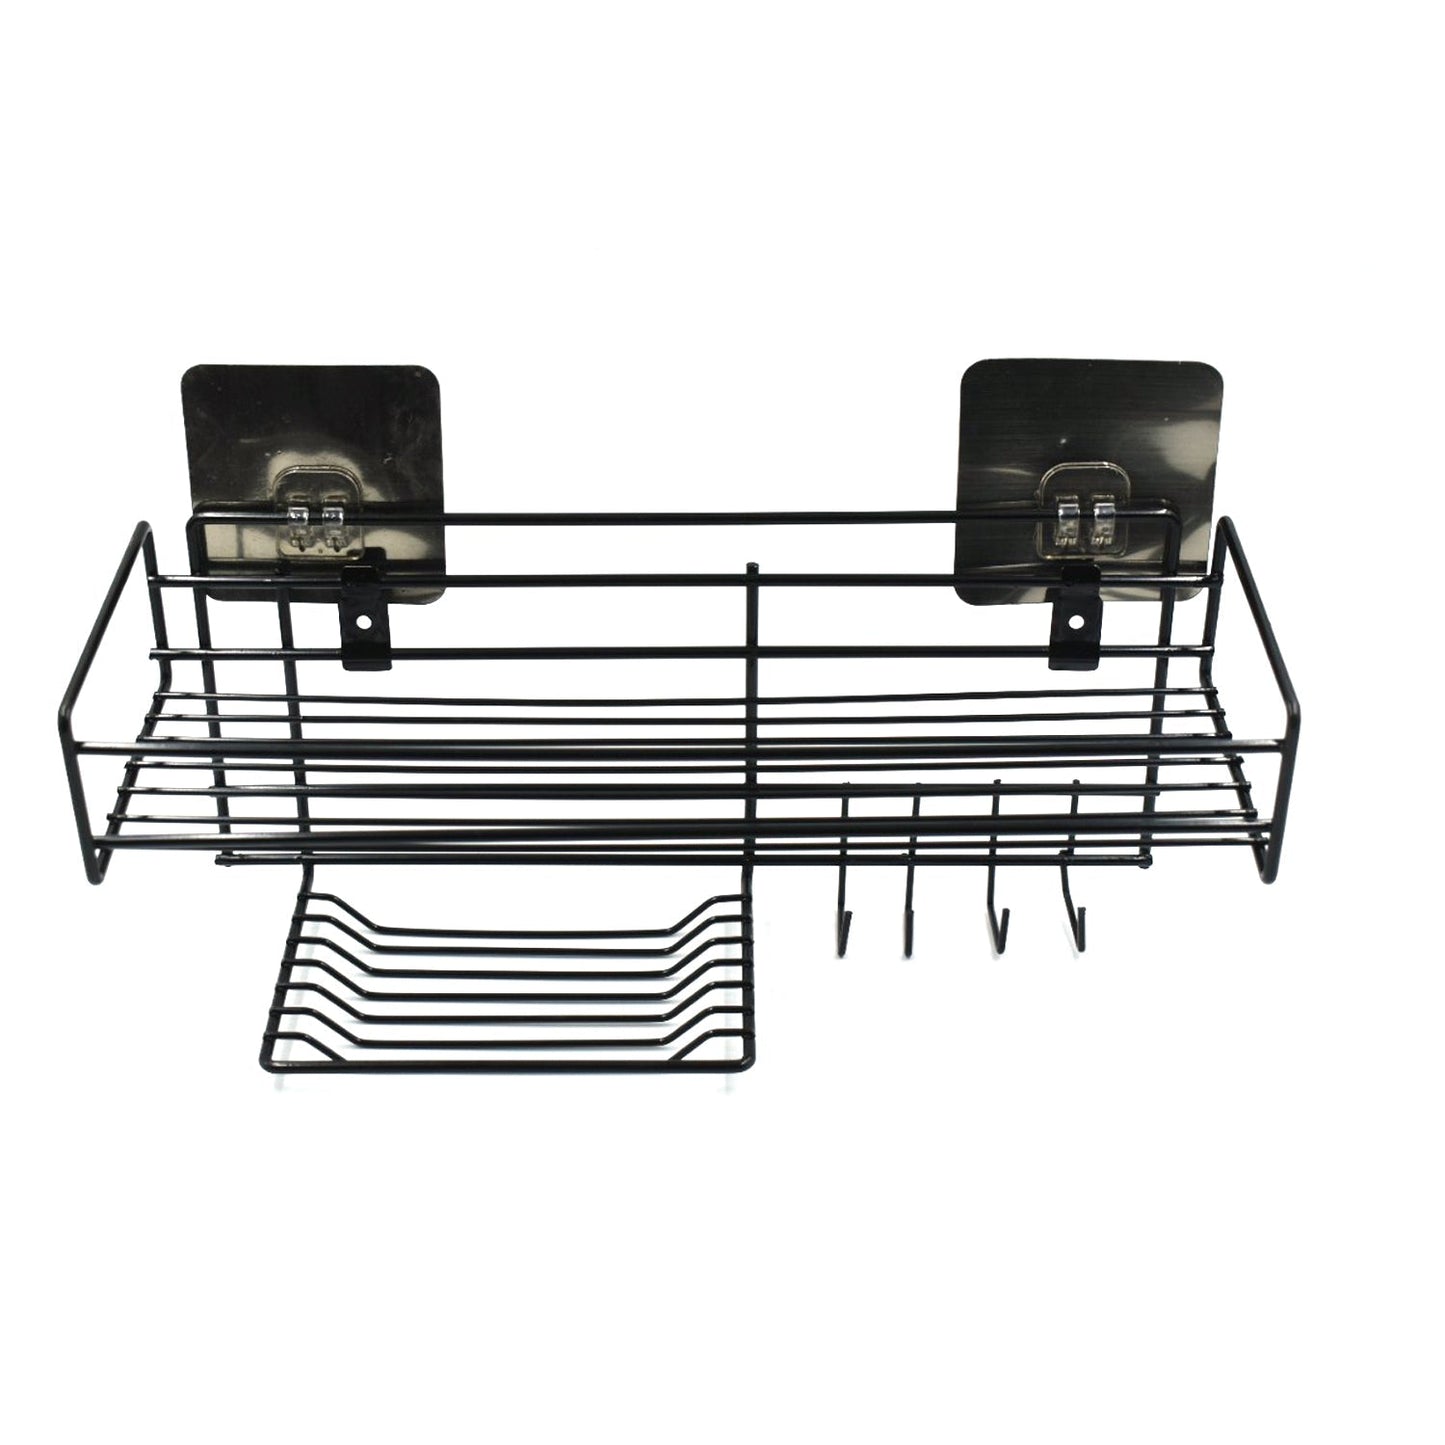 9009 3 in 1 Shower Shelf Rack for storing and holding various household stuffs and items etc. DeoDap